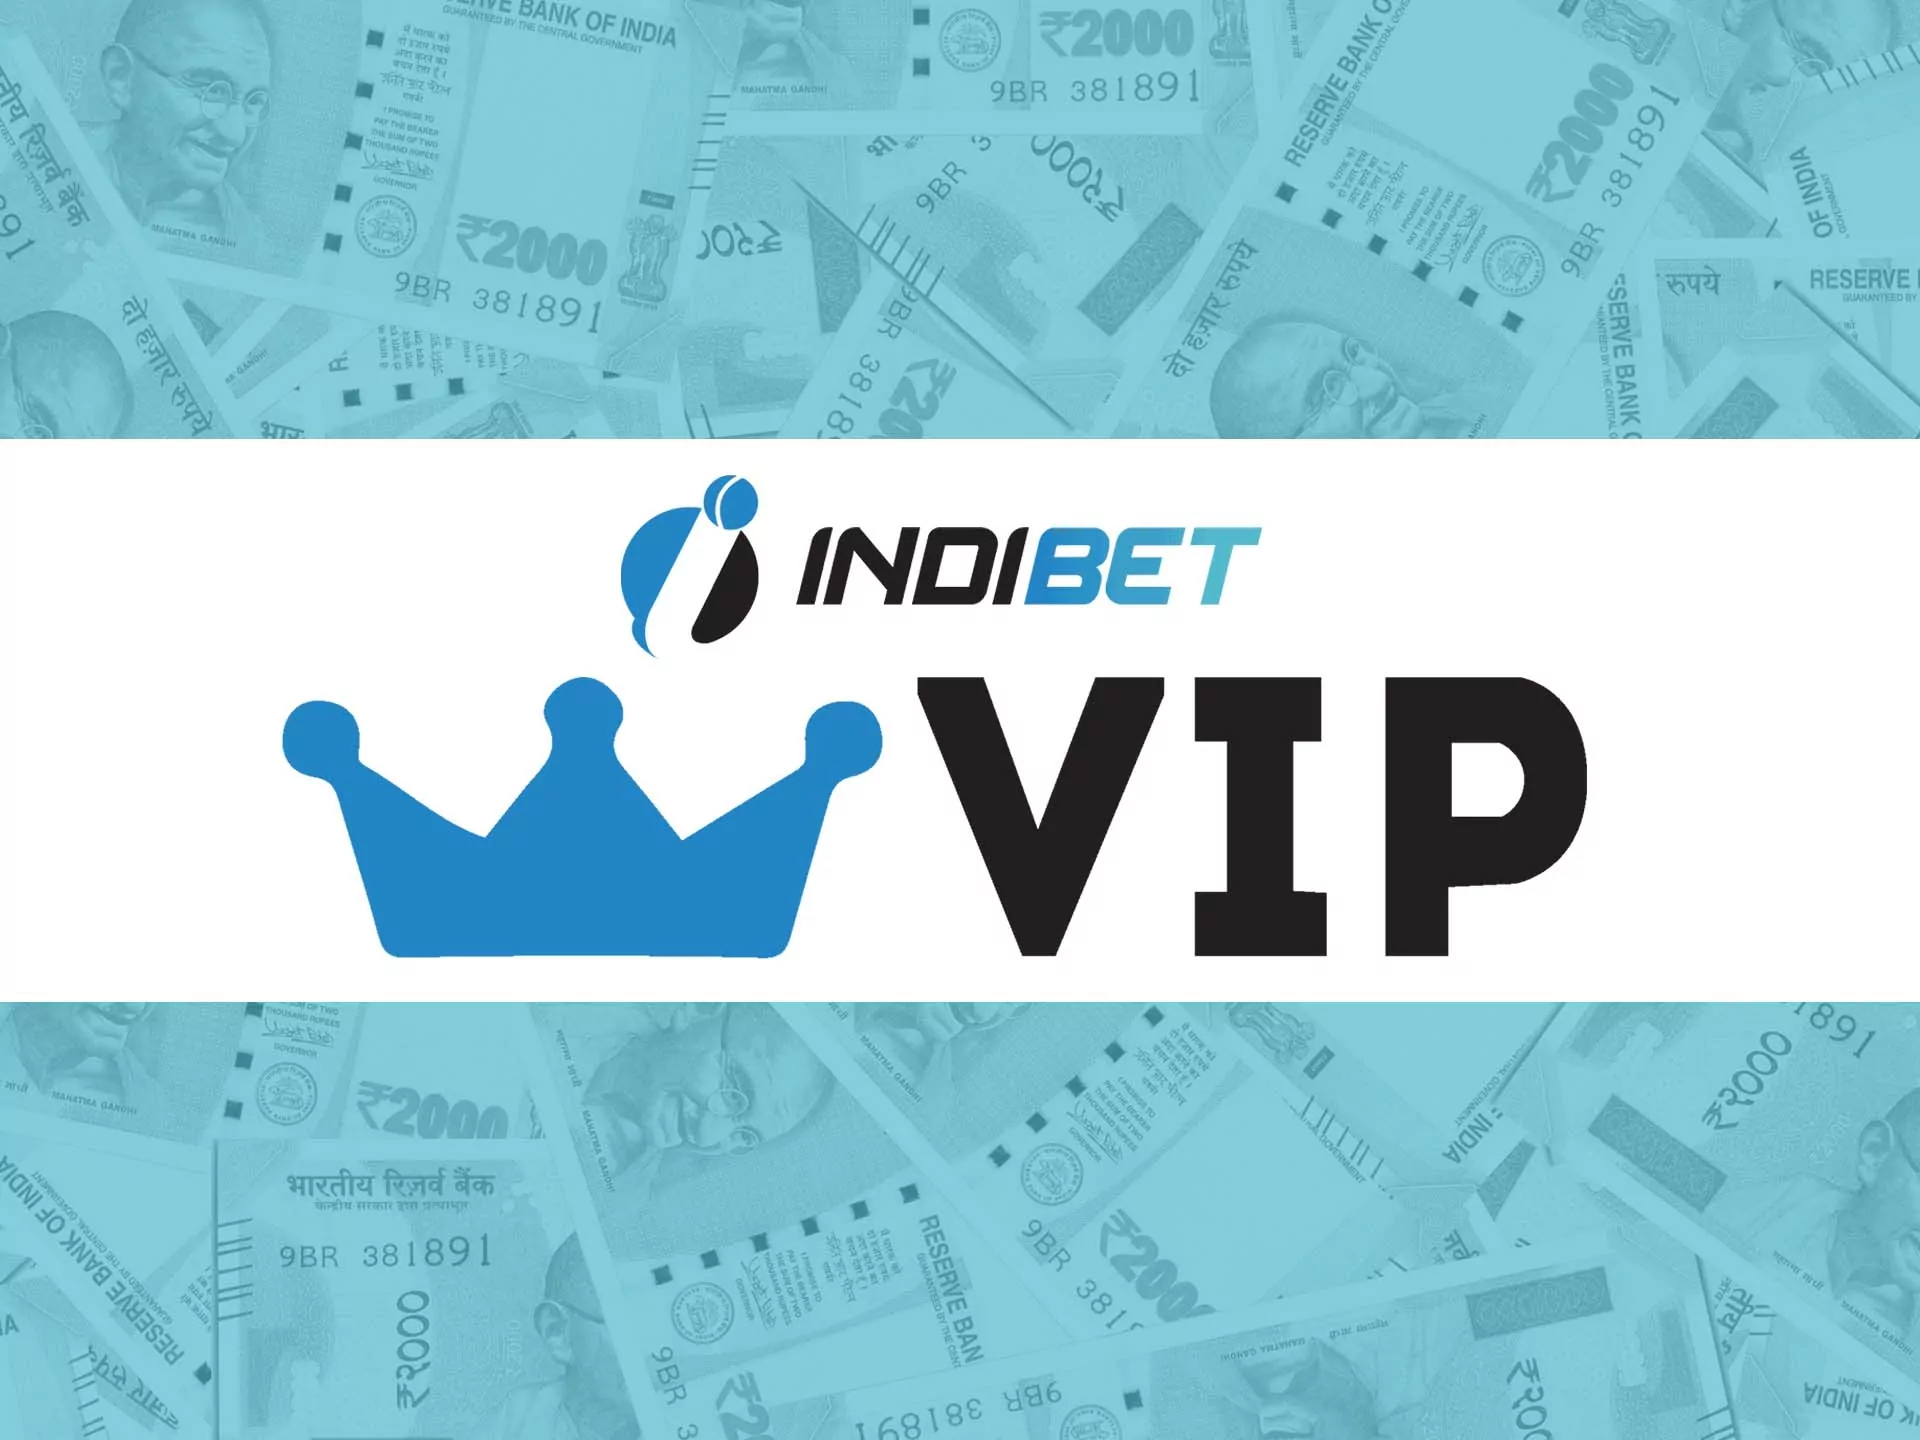 Get a cahback for regular plying at Indibet.